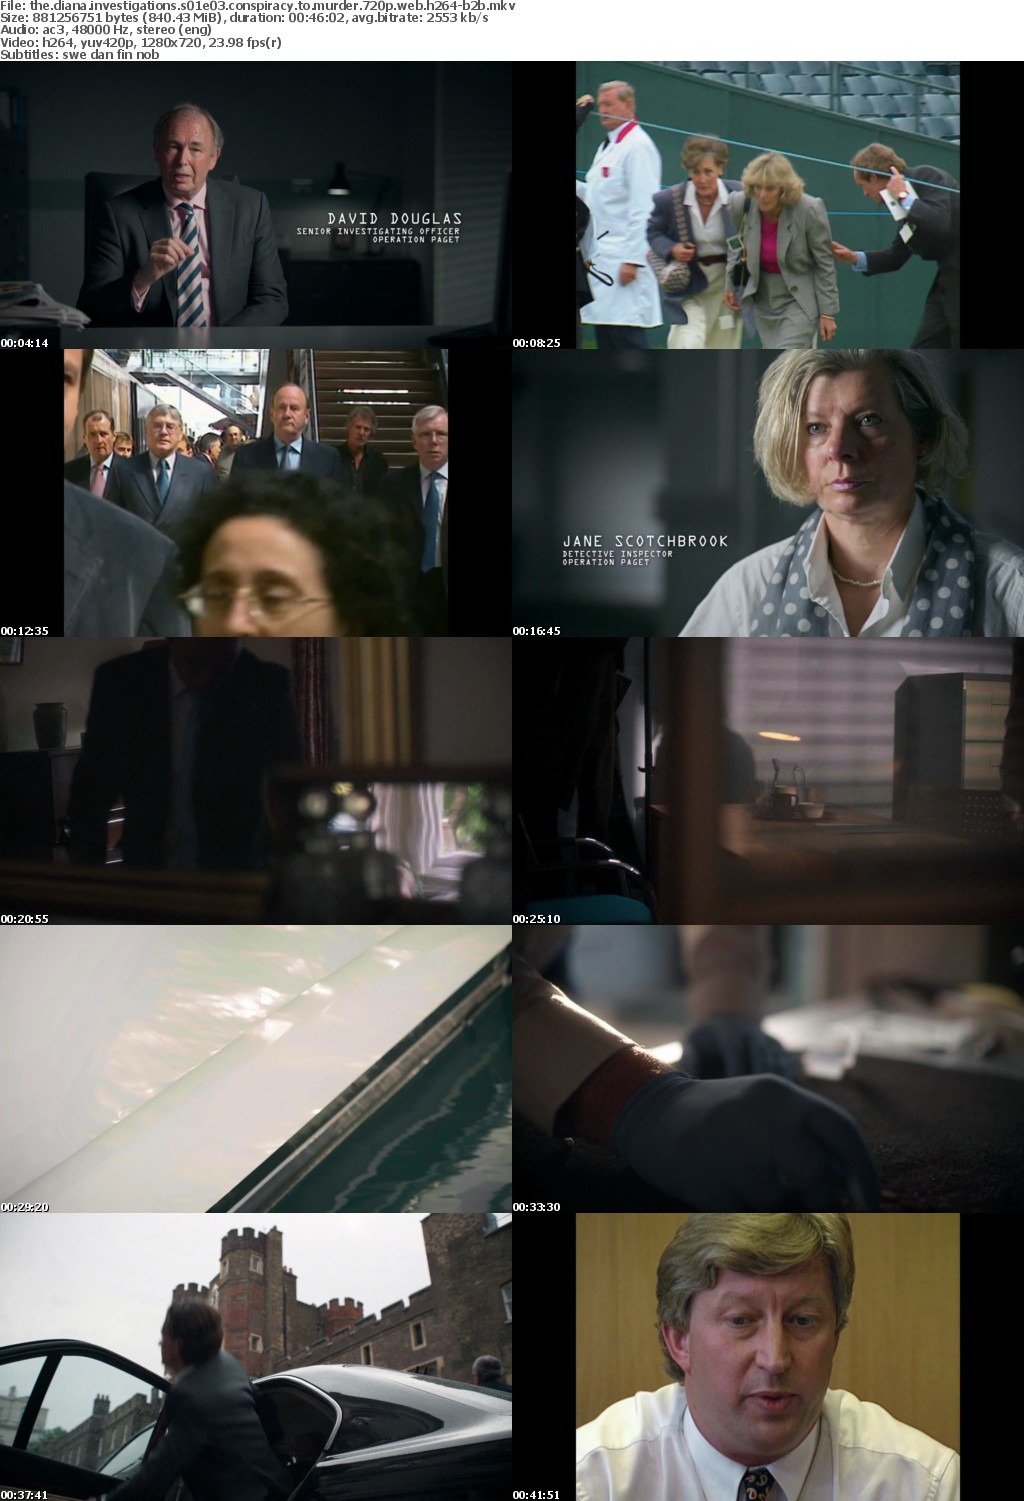 The Diana Investigations S01E03 Conspiracy to Murder 720p WEB h264-B2B